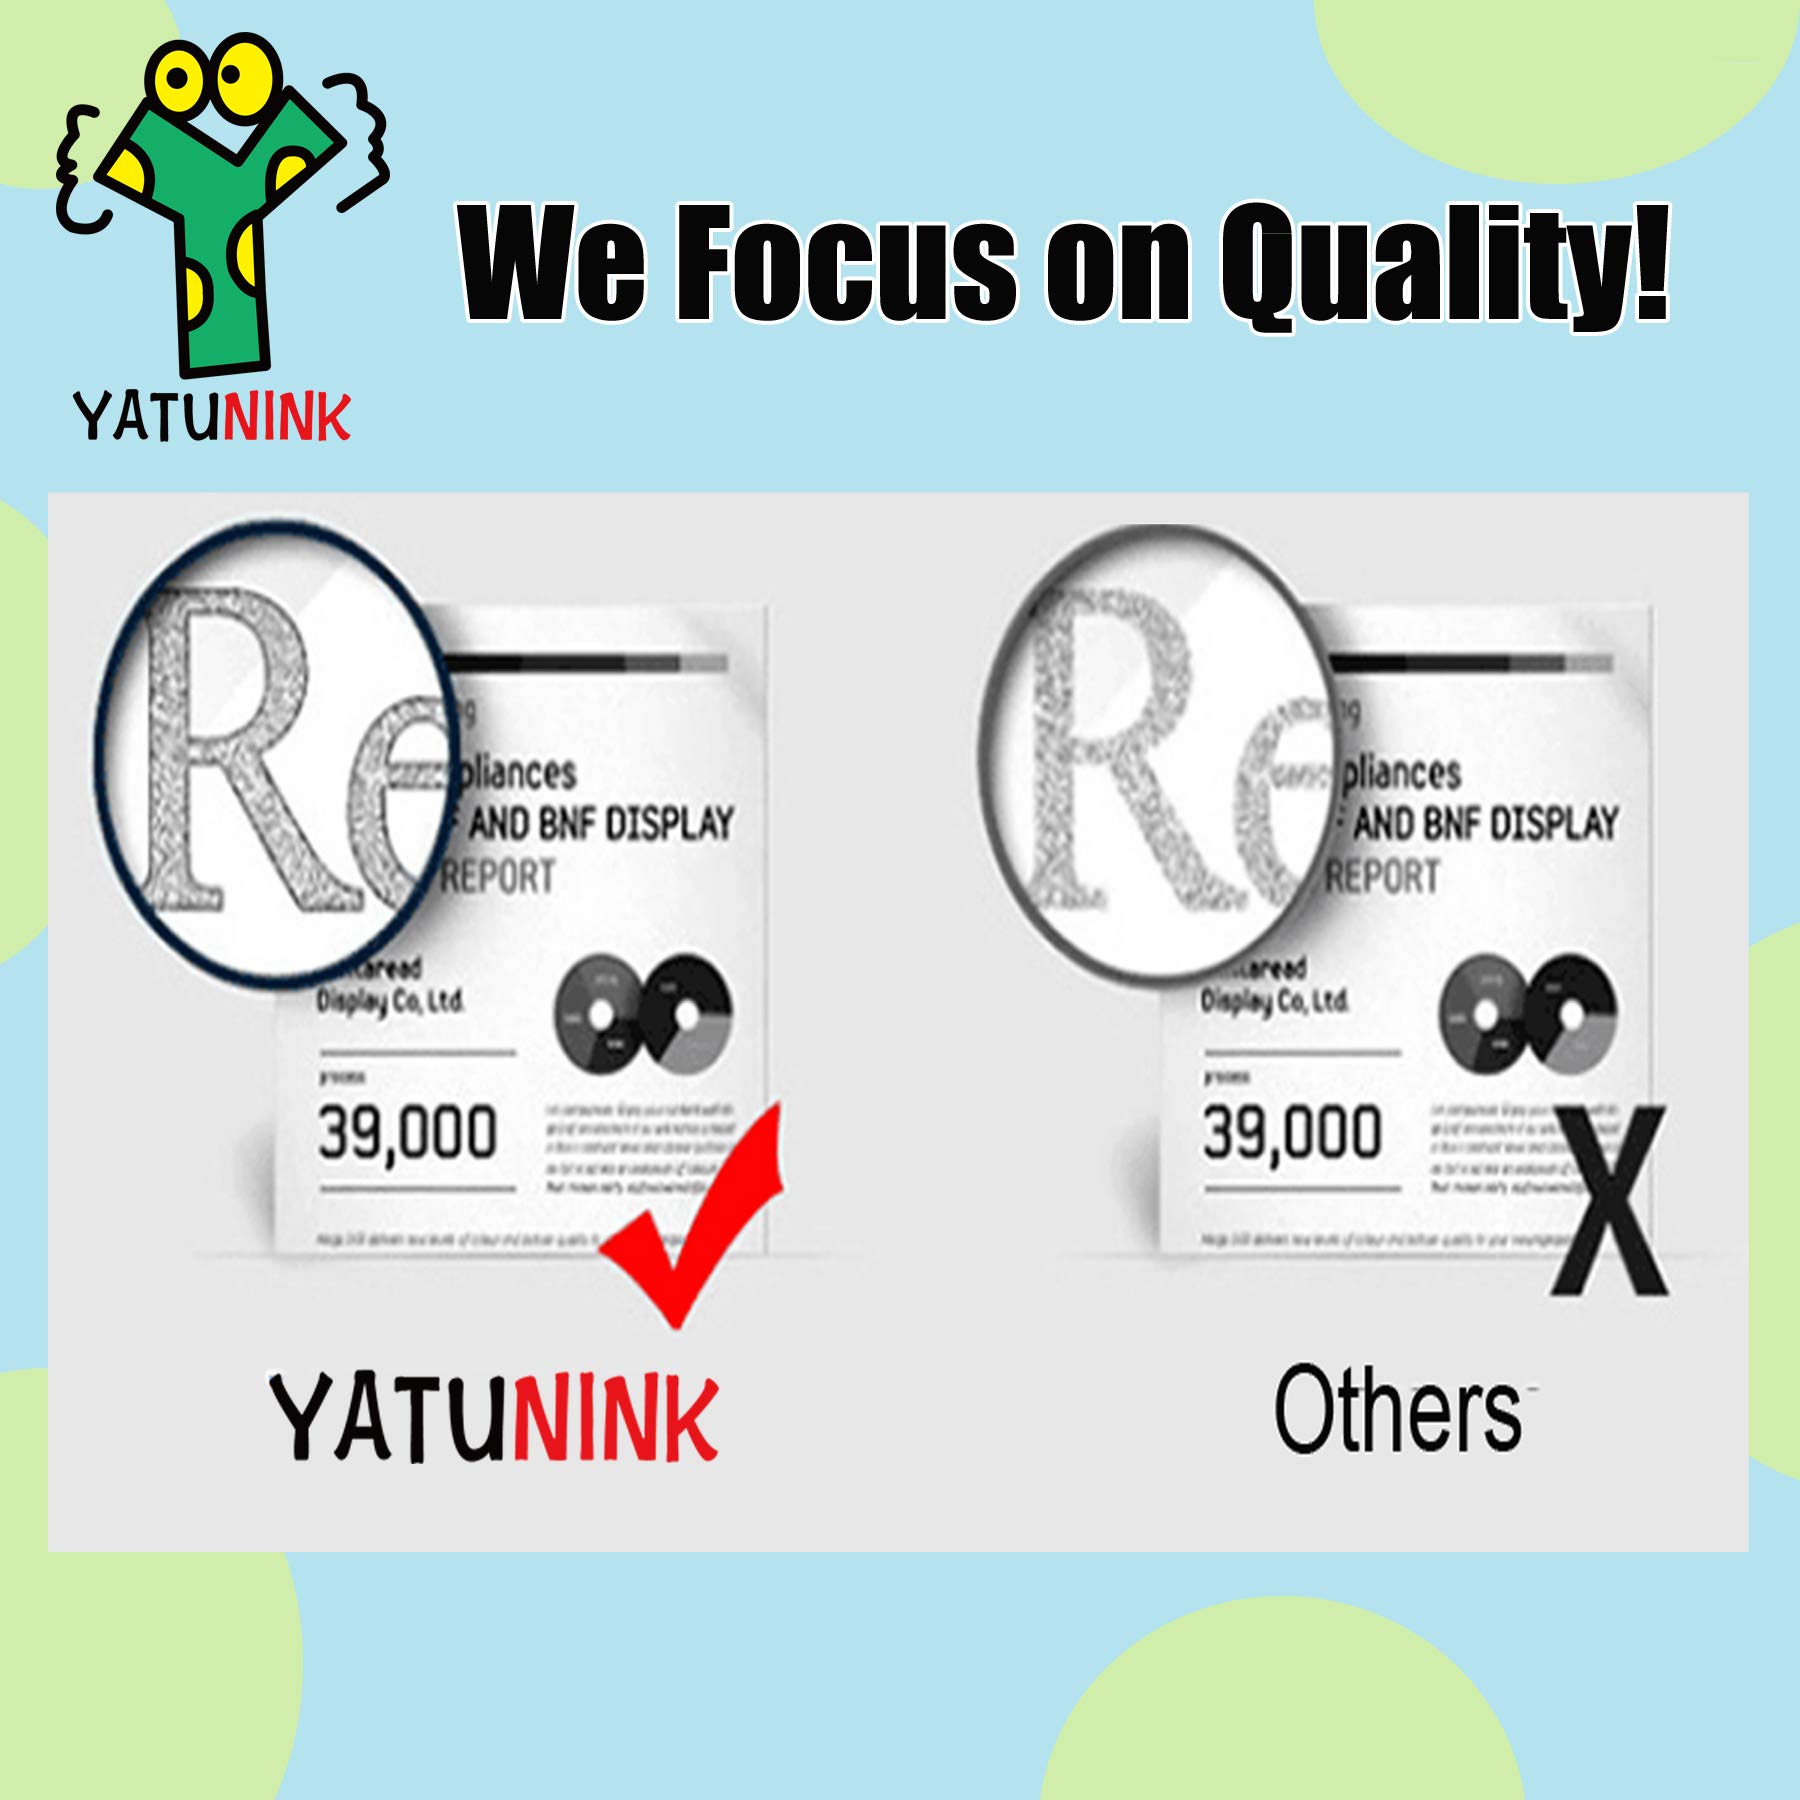 YATUNINK Replacement Ink Cartridge Replacement for HP 15 Ink Cartridge Black Work with Deskjet / FAX / Officejet / PSC Series Printer ( 1 Black )